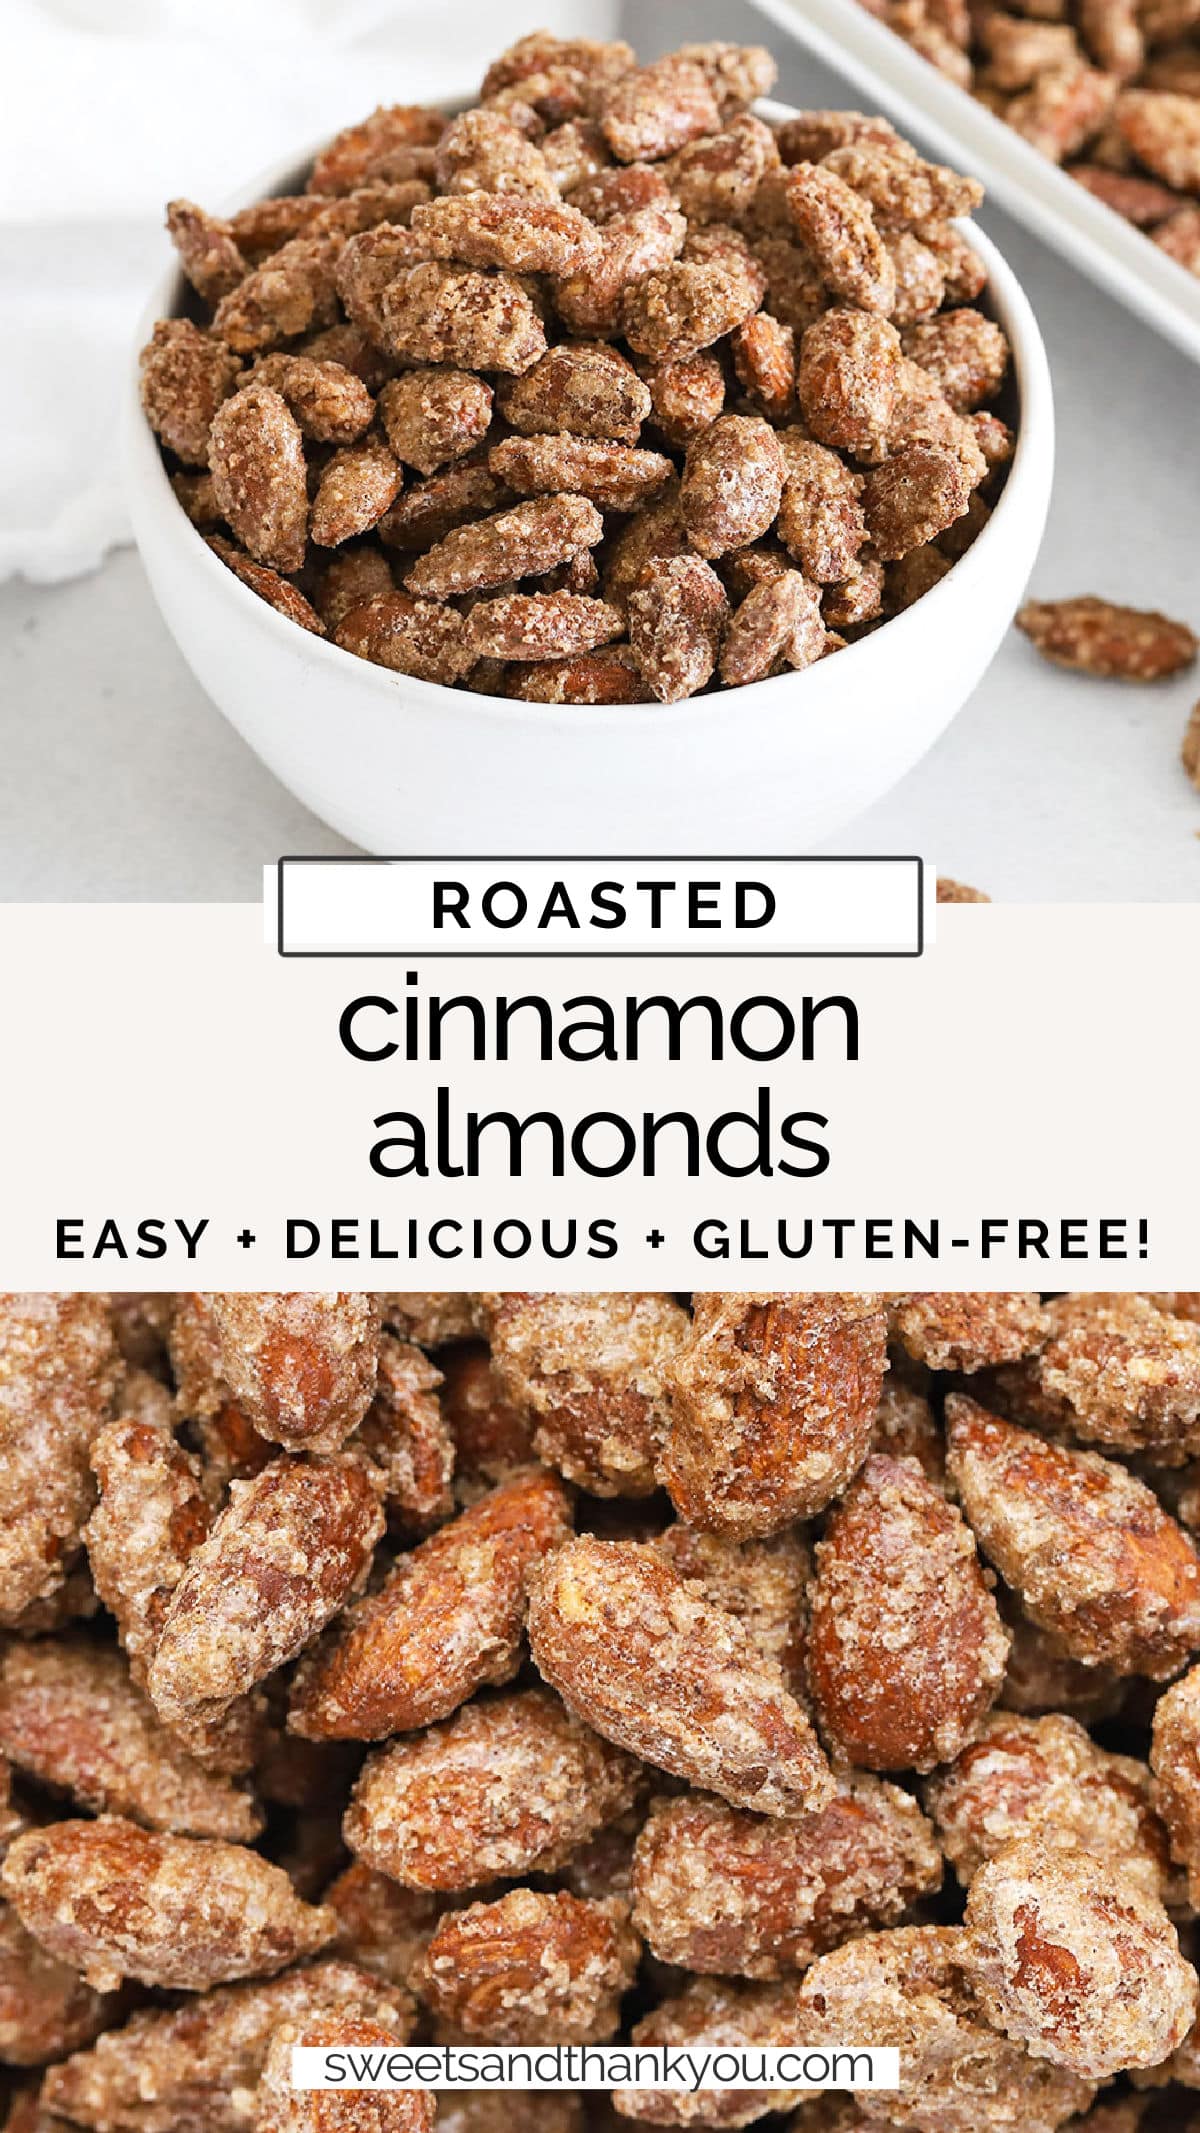 Easy Cinnamon Almonds - These roasted cinnamon almonds have all the old-fashioned flavor & crunch you love with a simply modern twist! // cinnamon sugar almonds // old fashioned cinnamon almonds // cinnamon roasted almonds recipe // the best cinnamon almonds recipe // how to package almonds for christmas // edible christmas gift // neighbor christmas gift // Crunchy cinnamon almonds // sweet cinnamon almonds //